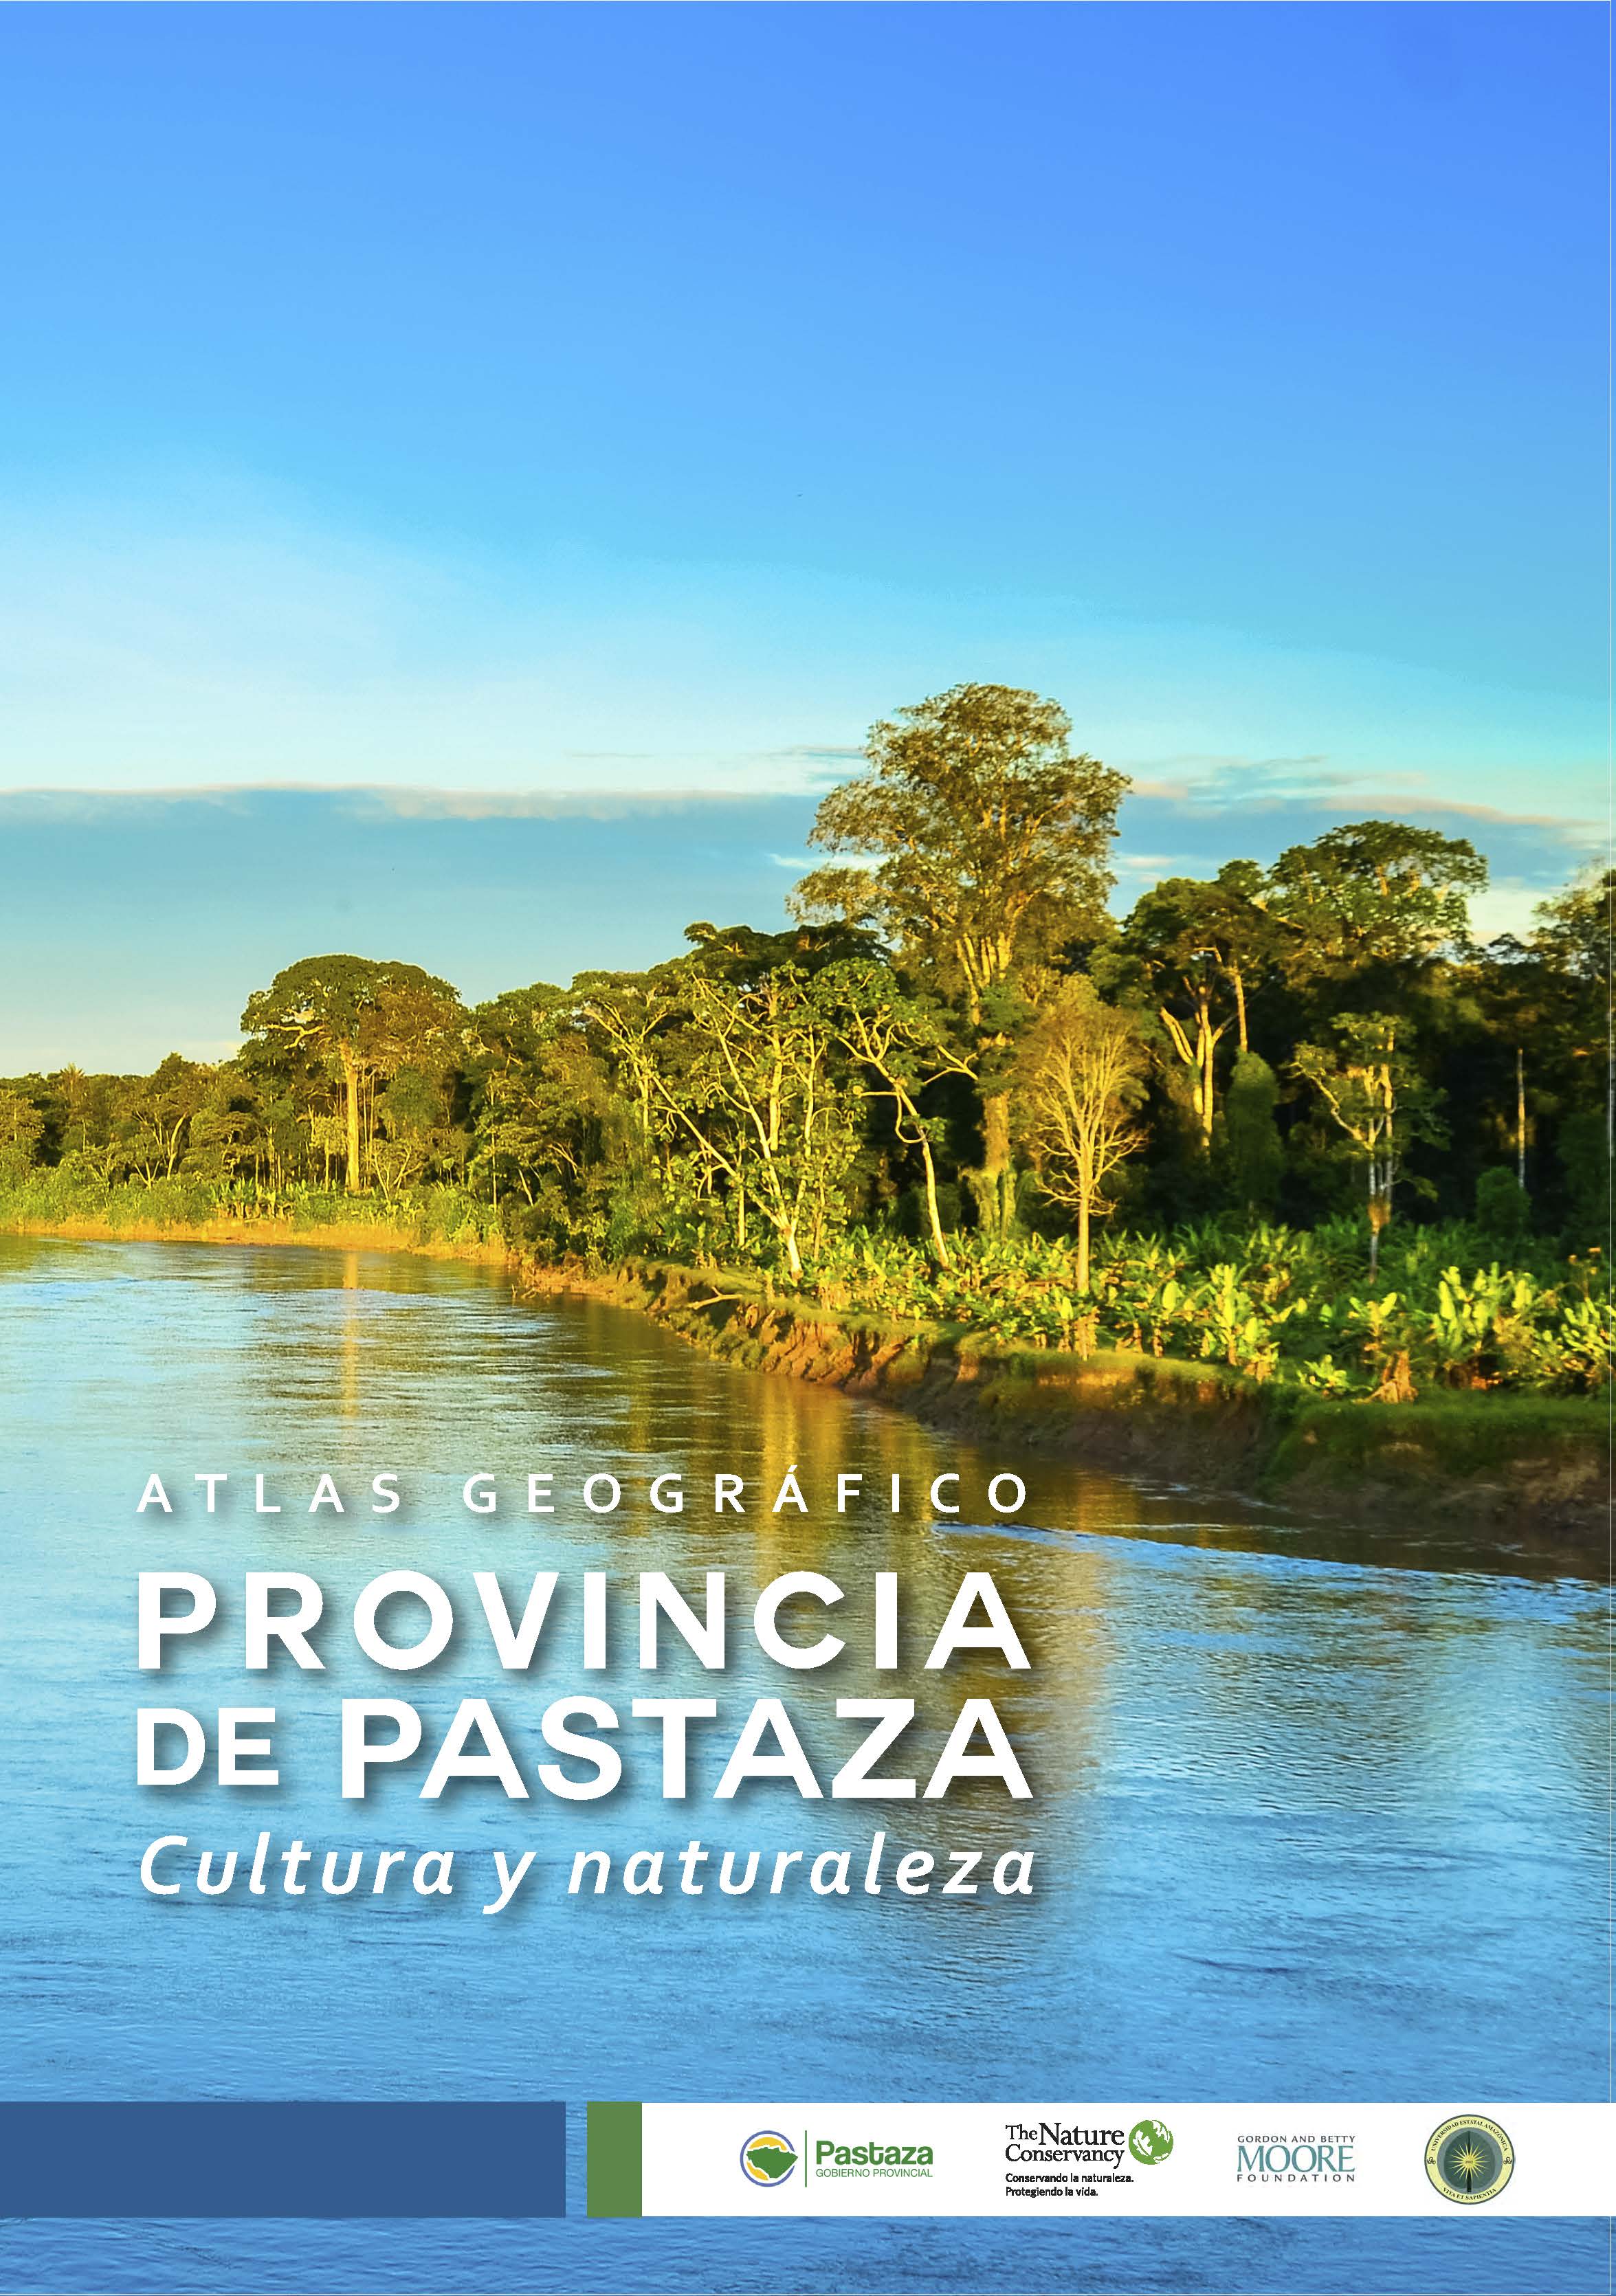 Cover of an Atlas that shows the Amazon forest in the early morning.